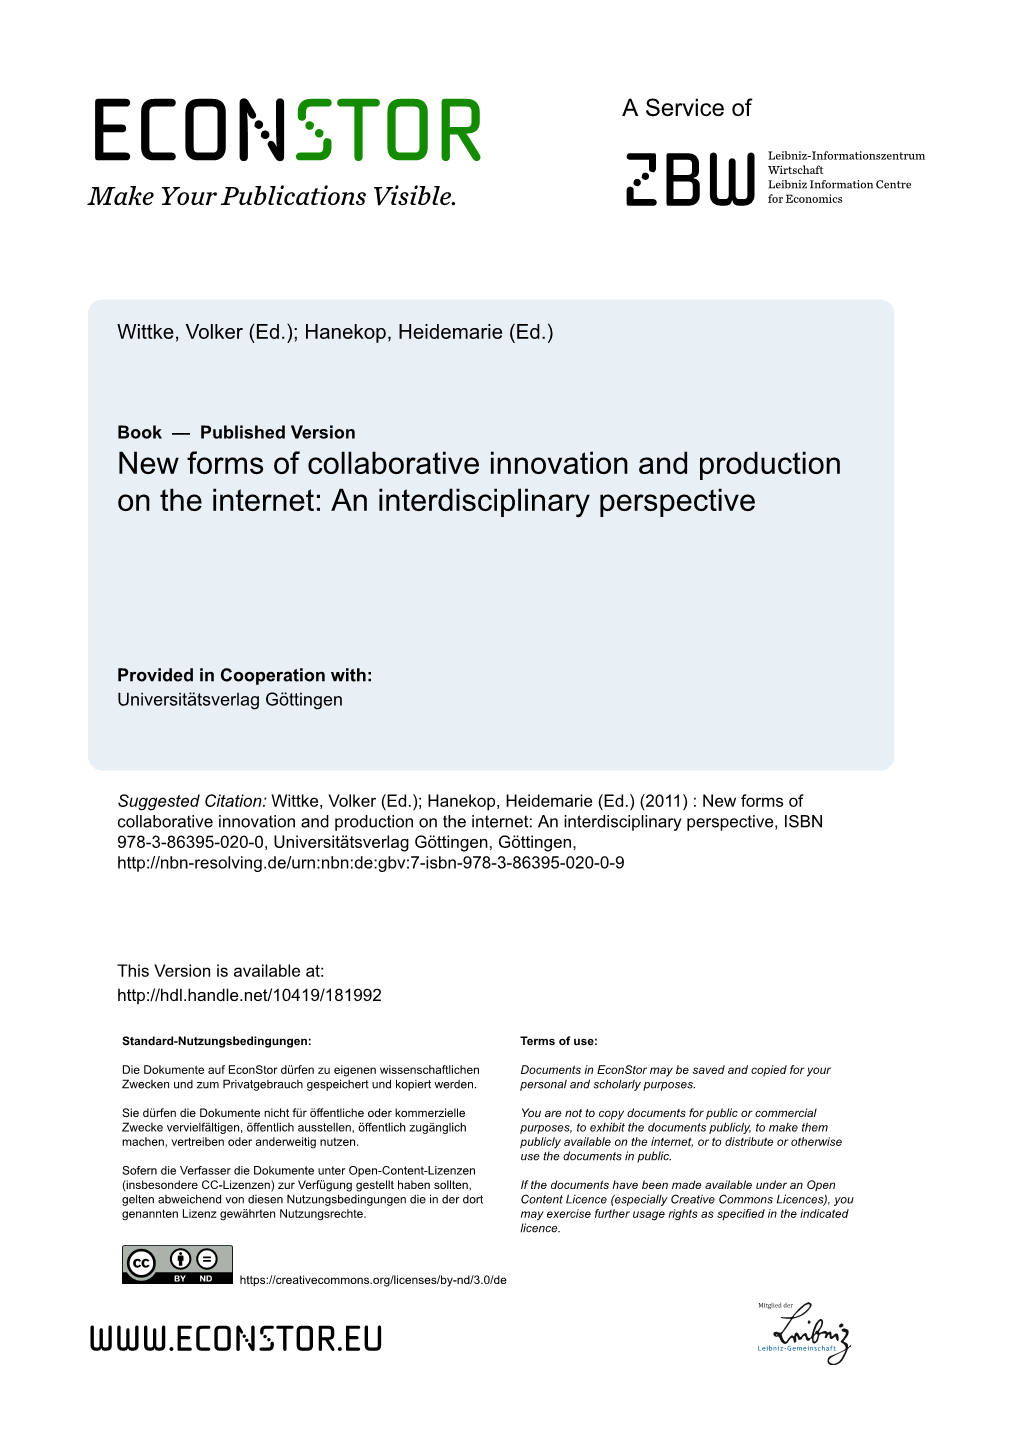 New Forms of Collaborative Innovation and Production on the Internet: an Interdisciplinary Perspective